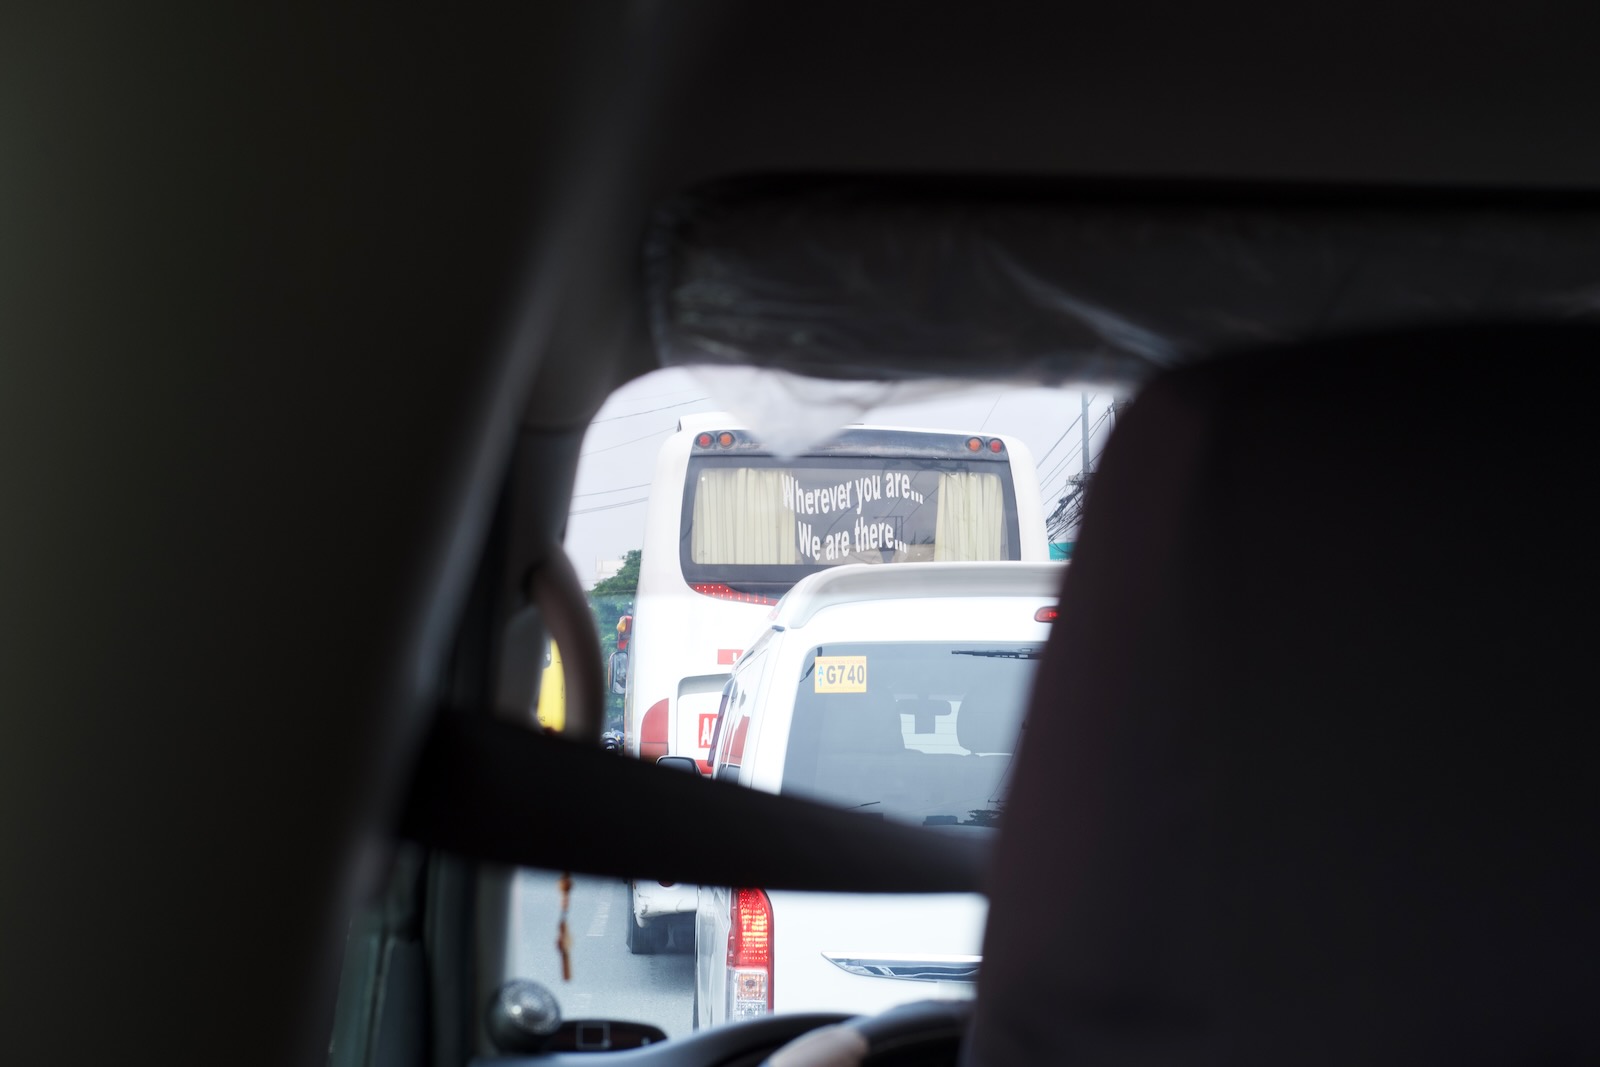 A view of traffic, shot from within a van. Through the windshield a bus is in view, with wavy text stenciled on the rear windshield saying “Wherever you are…We are there…”